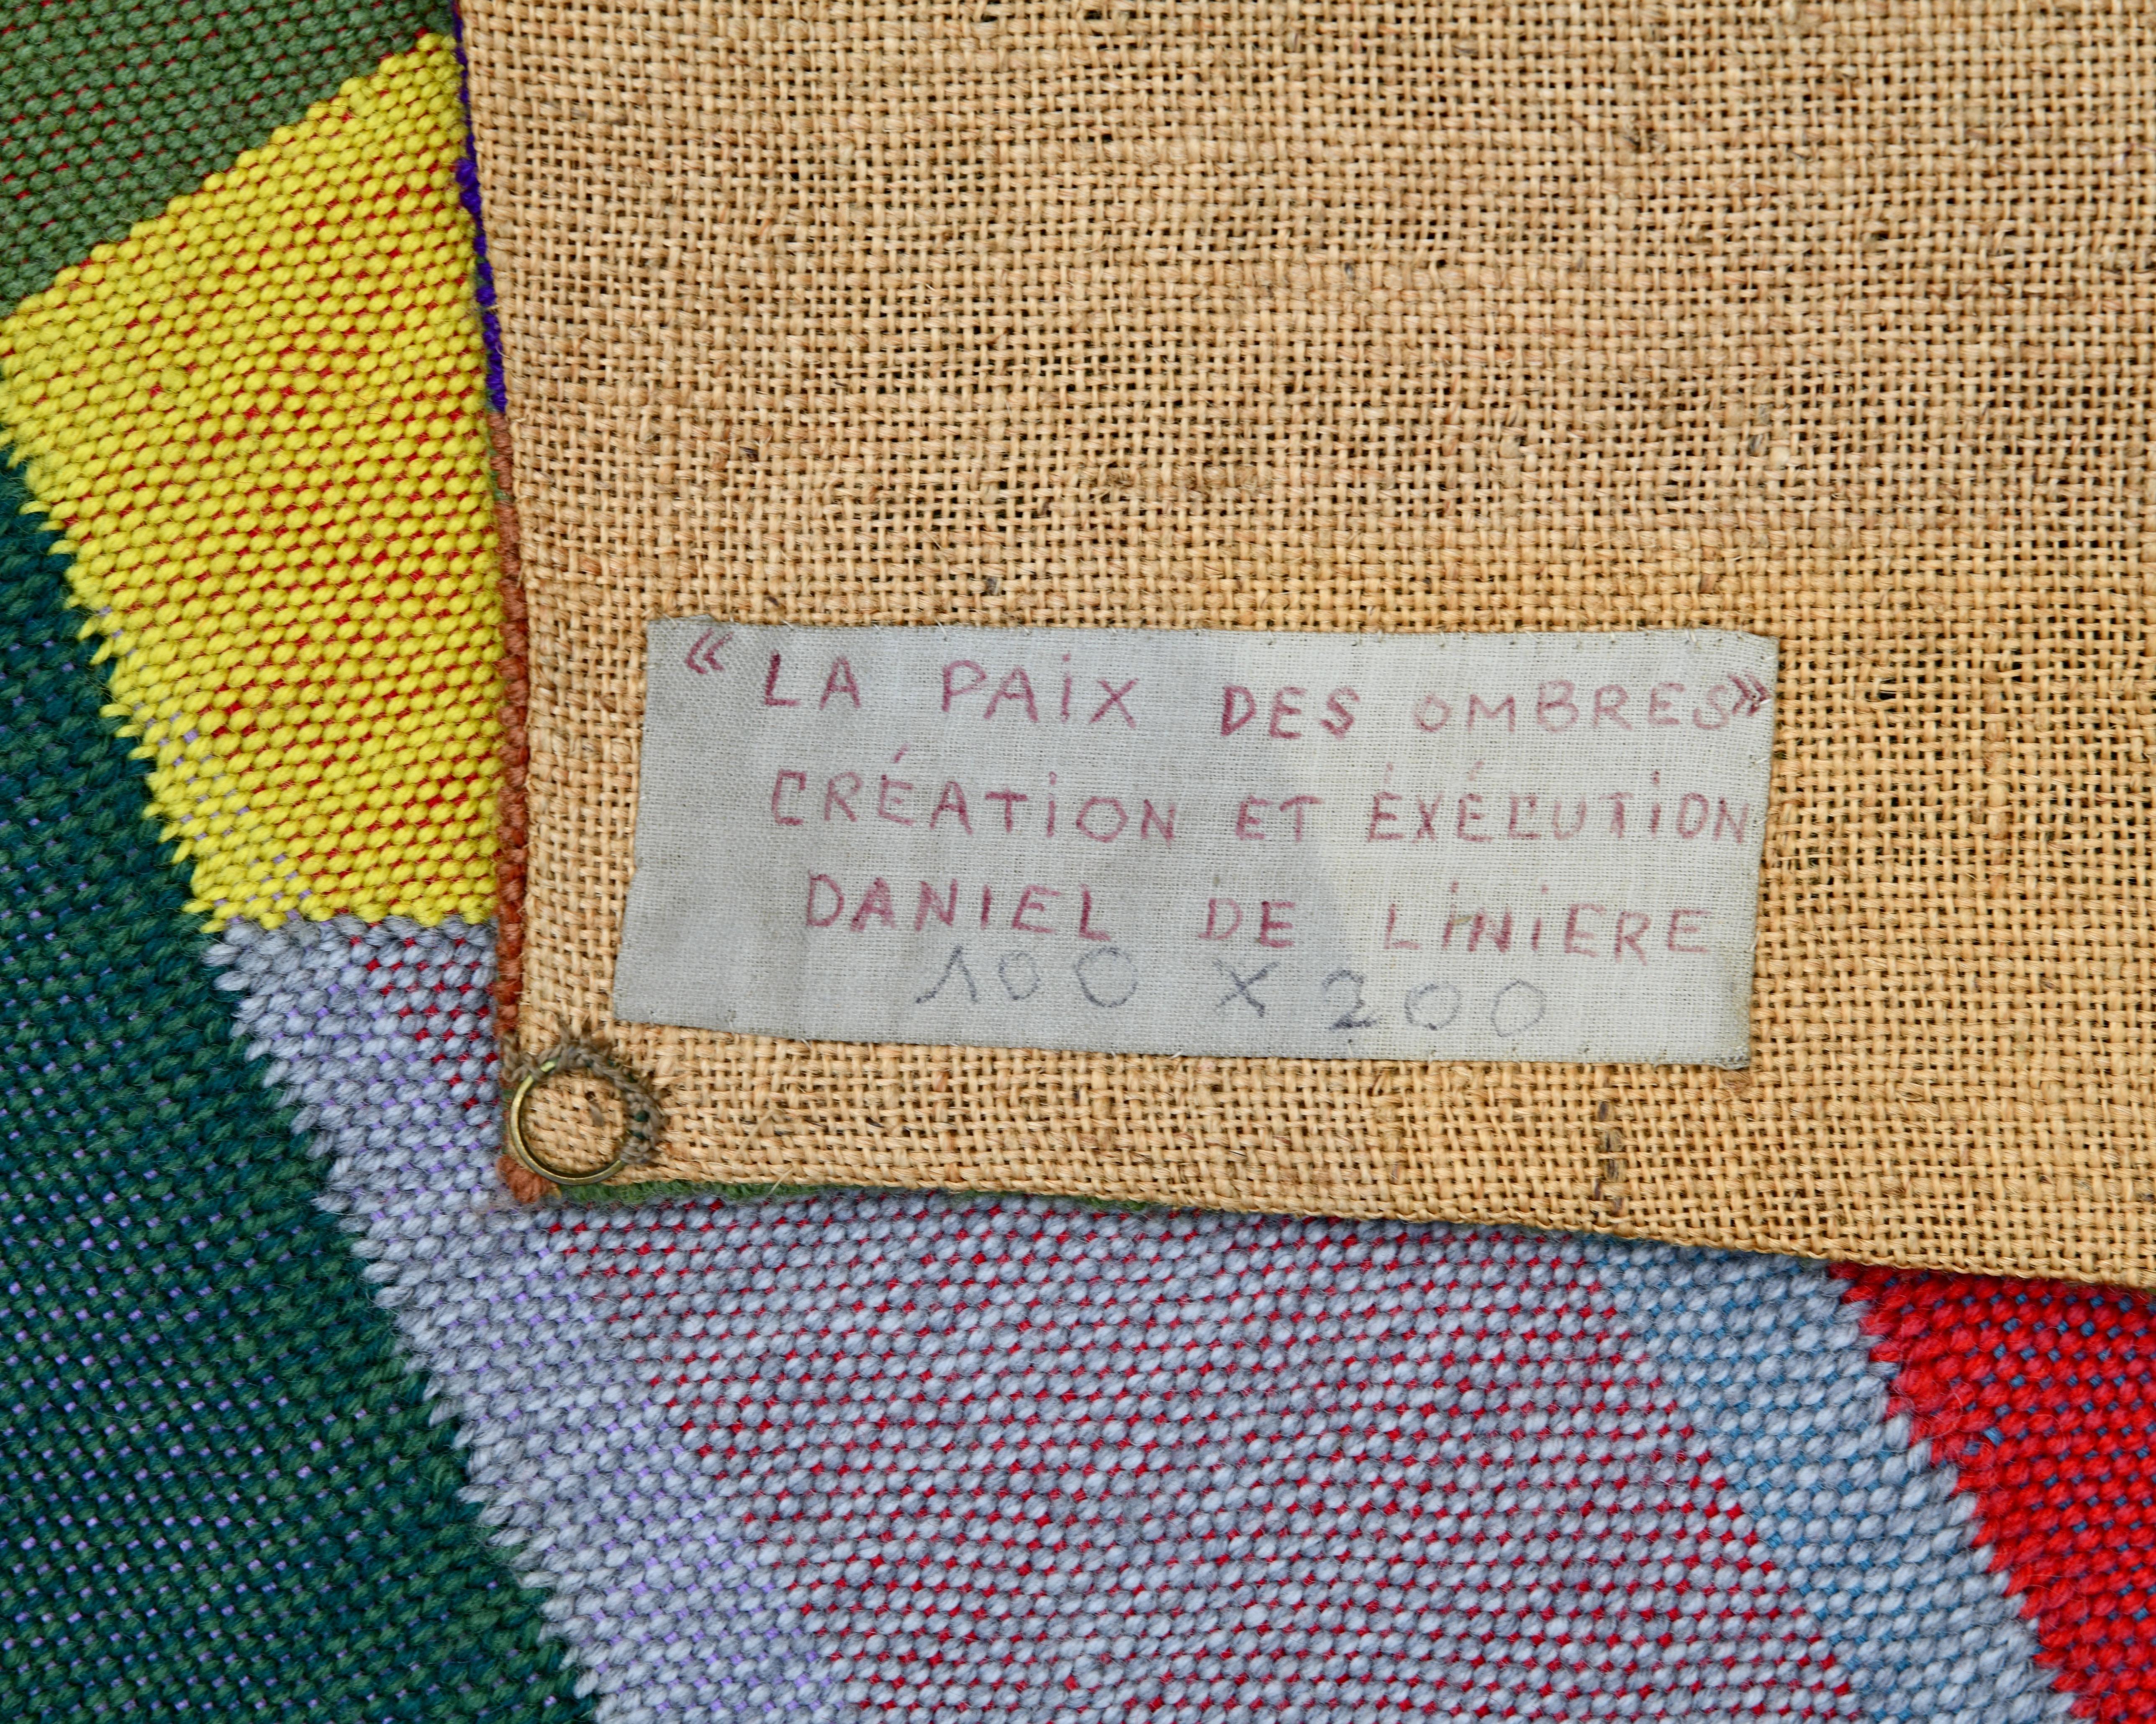 French Mid-century unique abstract tapestry handwoven by the artist Daniel de Liniere 